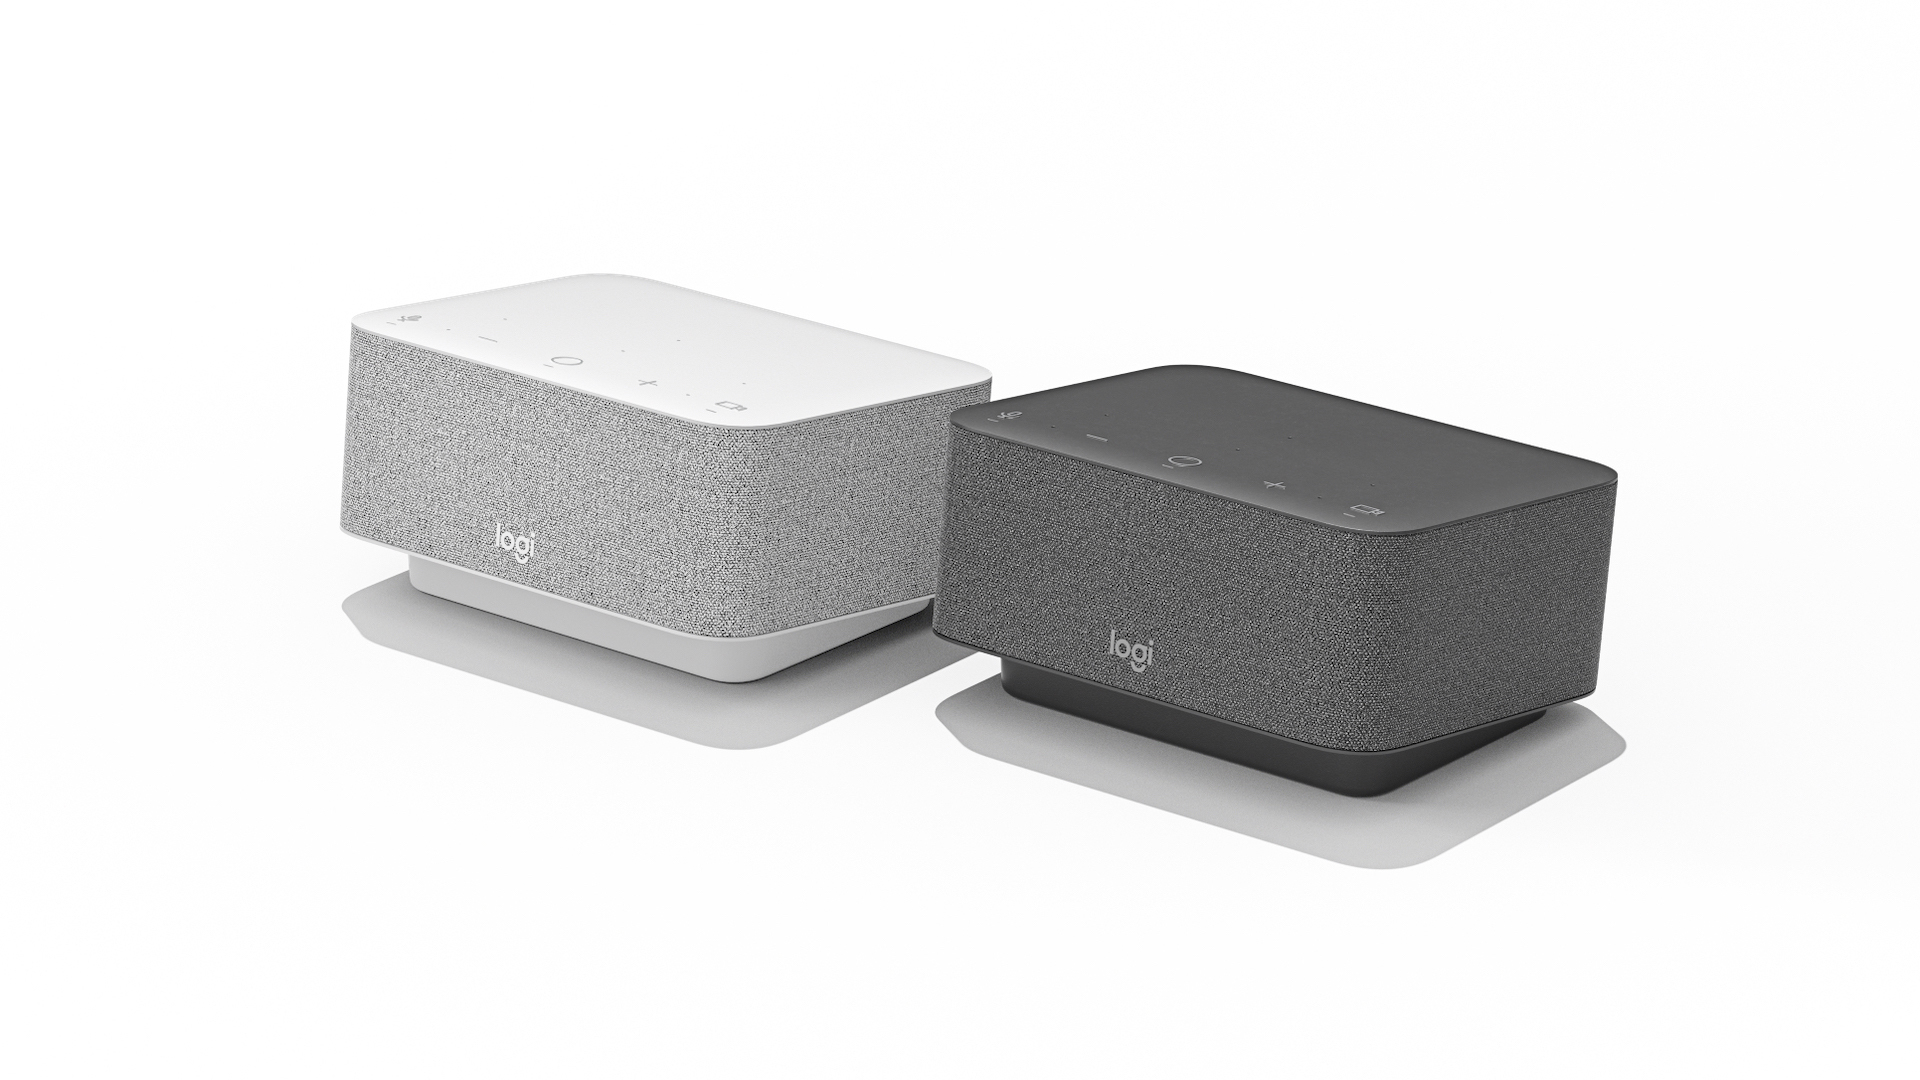 Logitech Introduces All-In-One Dock to Declutter the Desktop and Make Joining Meetings Easy